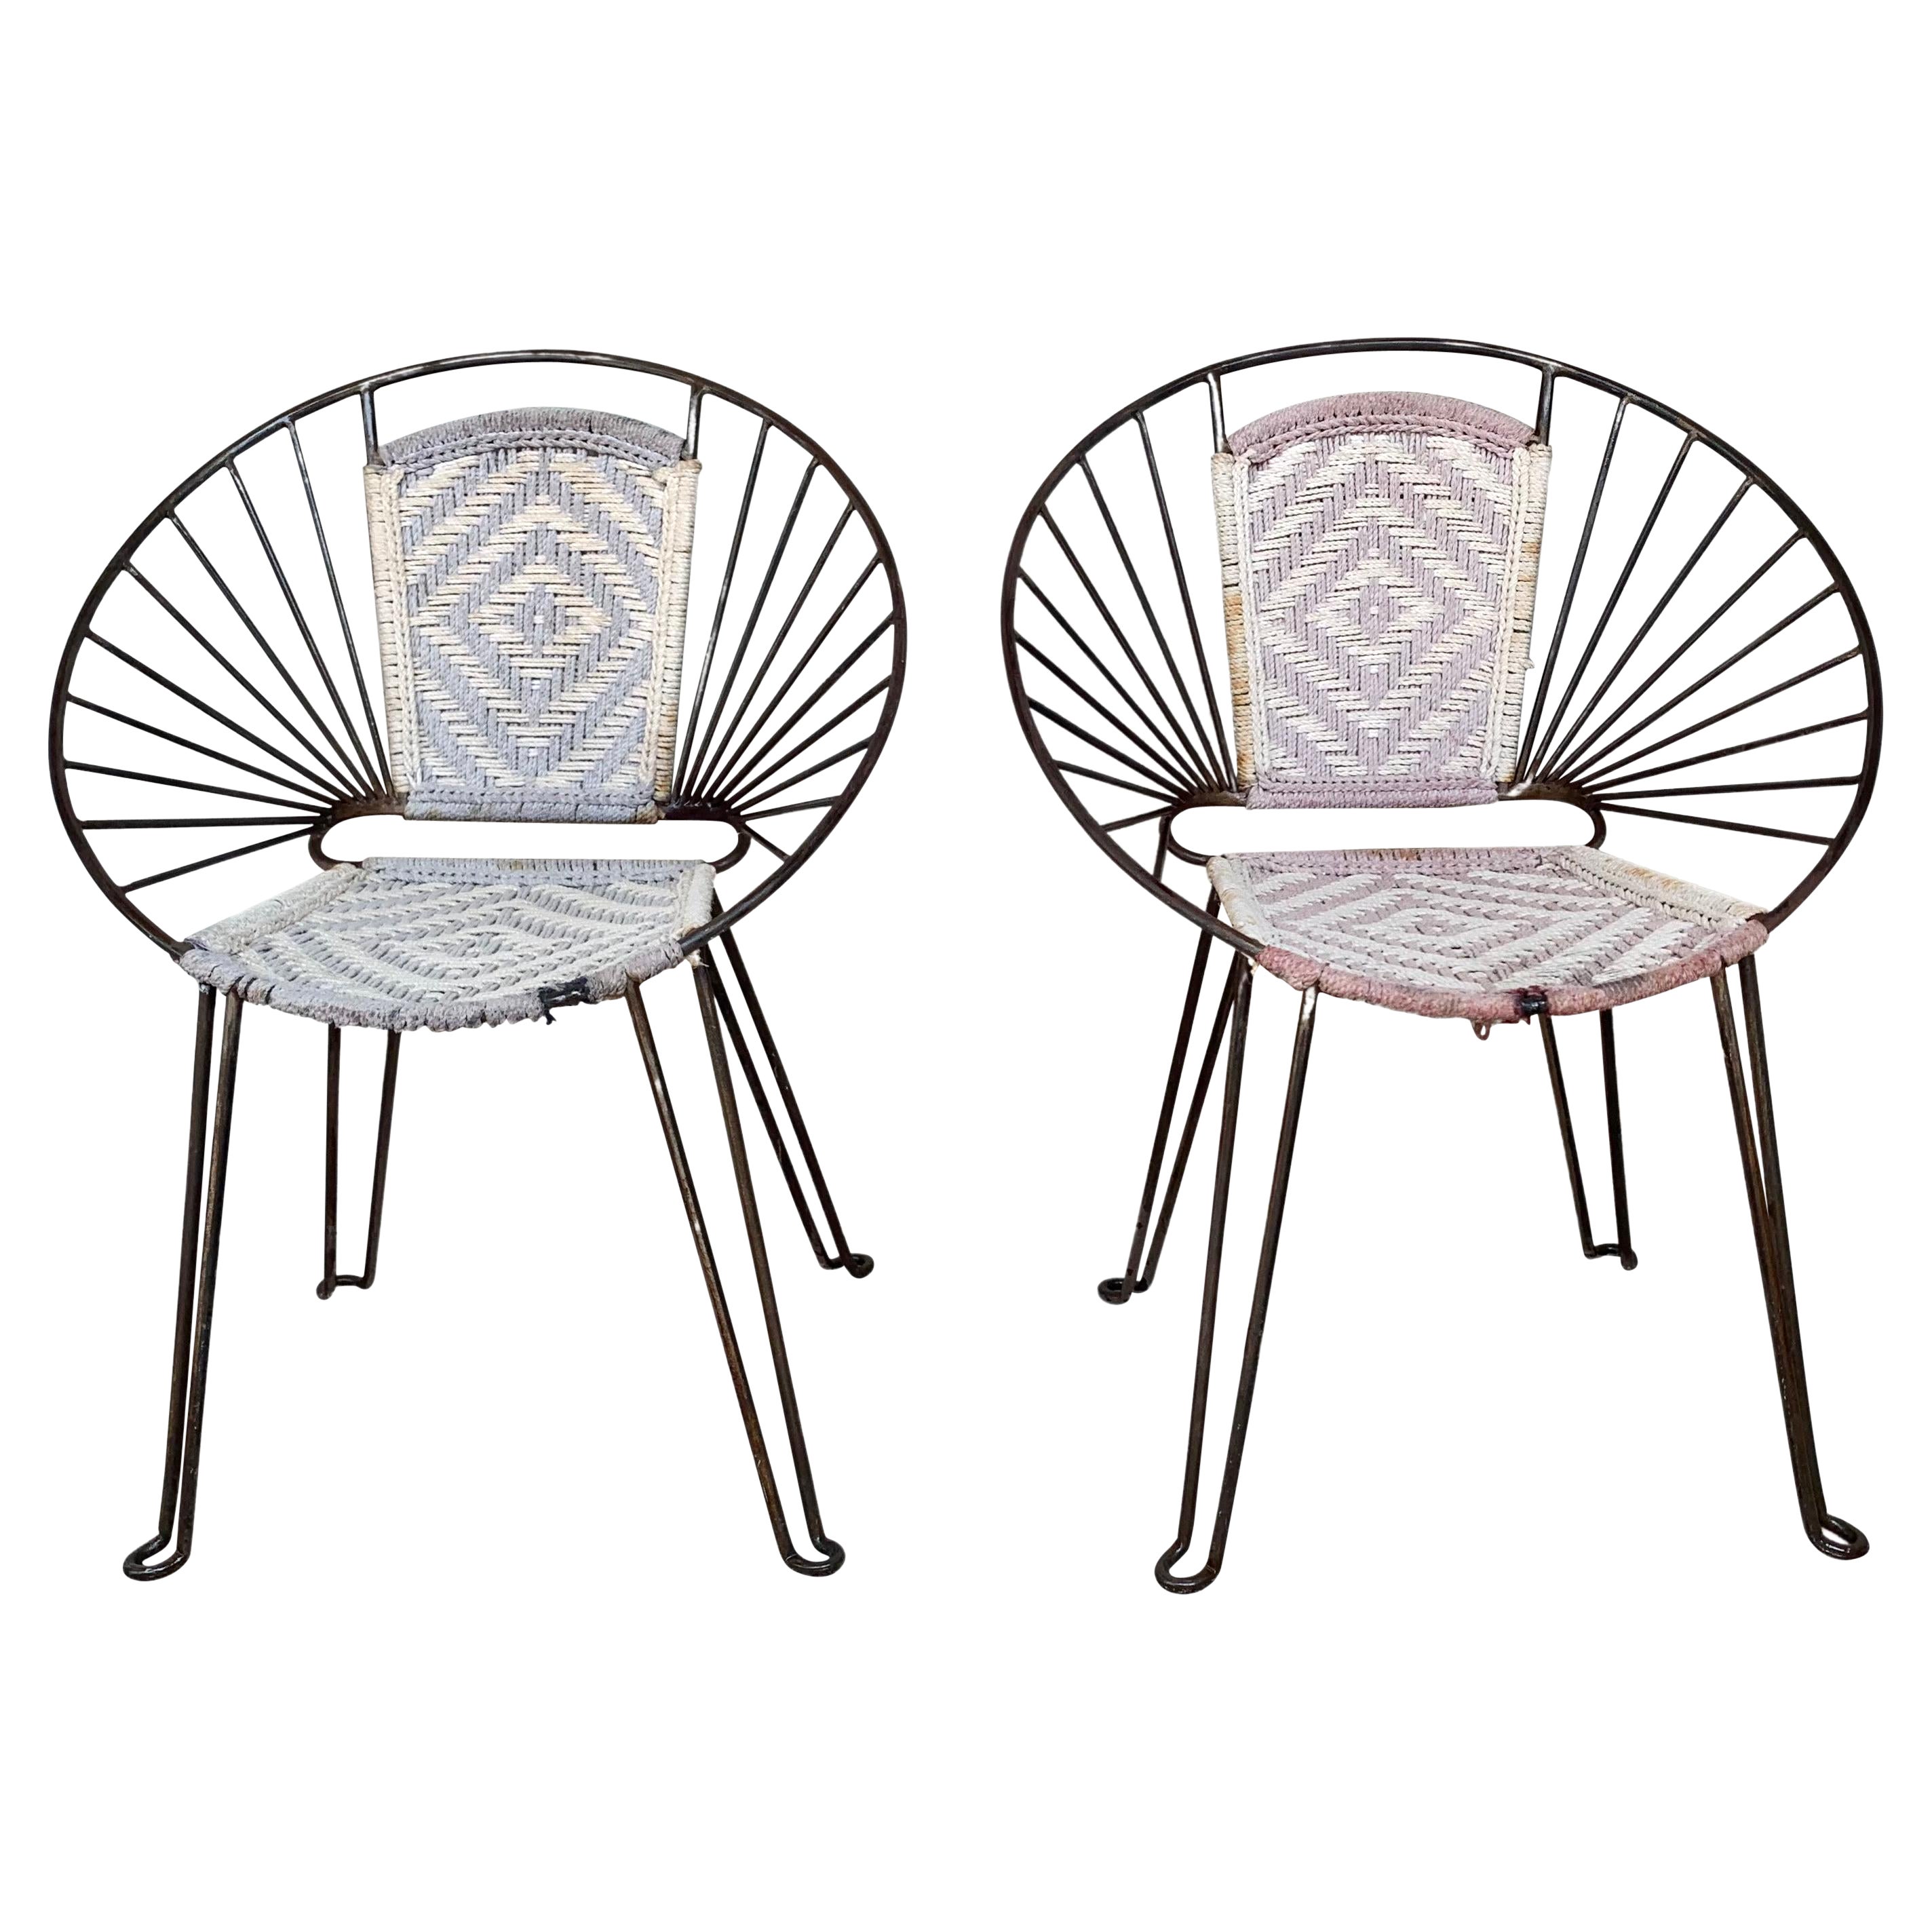 Pair Mid-Century Hoop Chairs with Caned Seat and Back